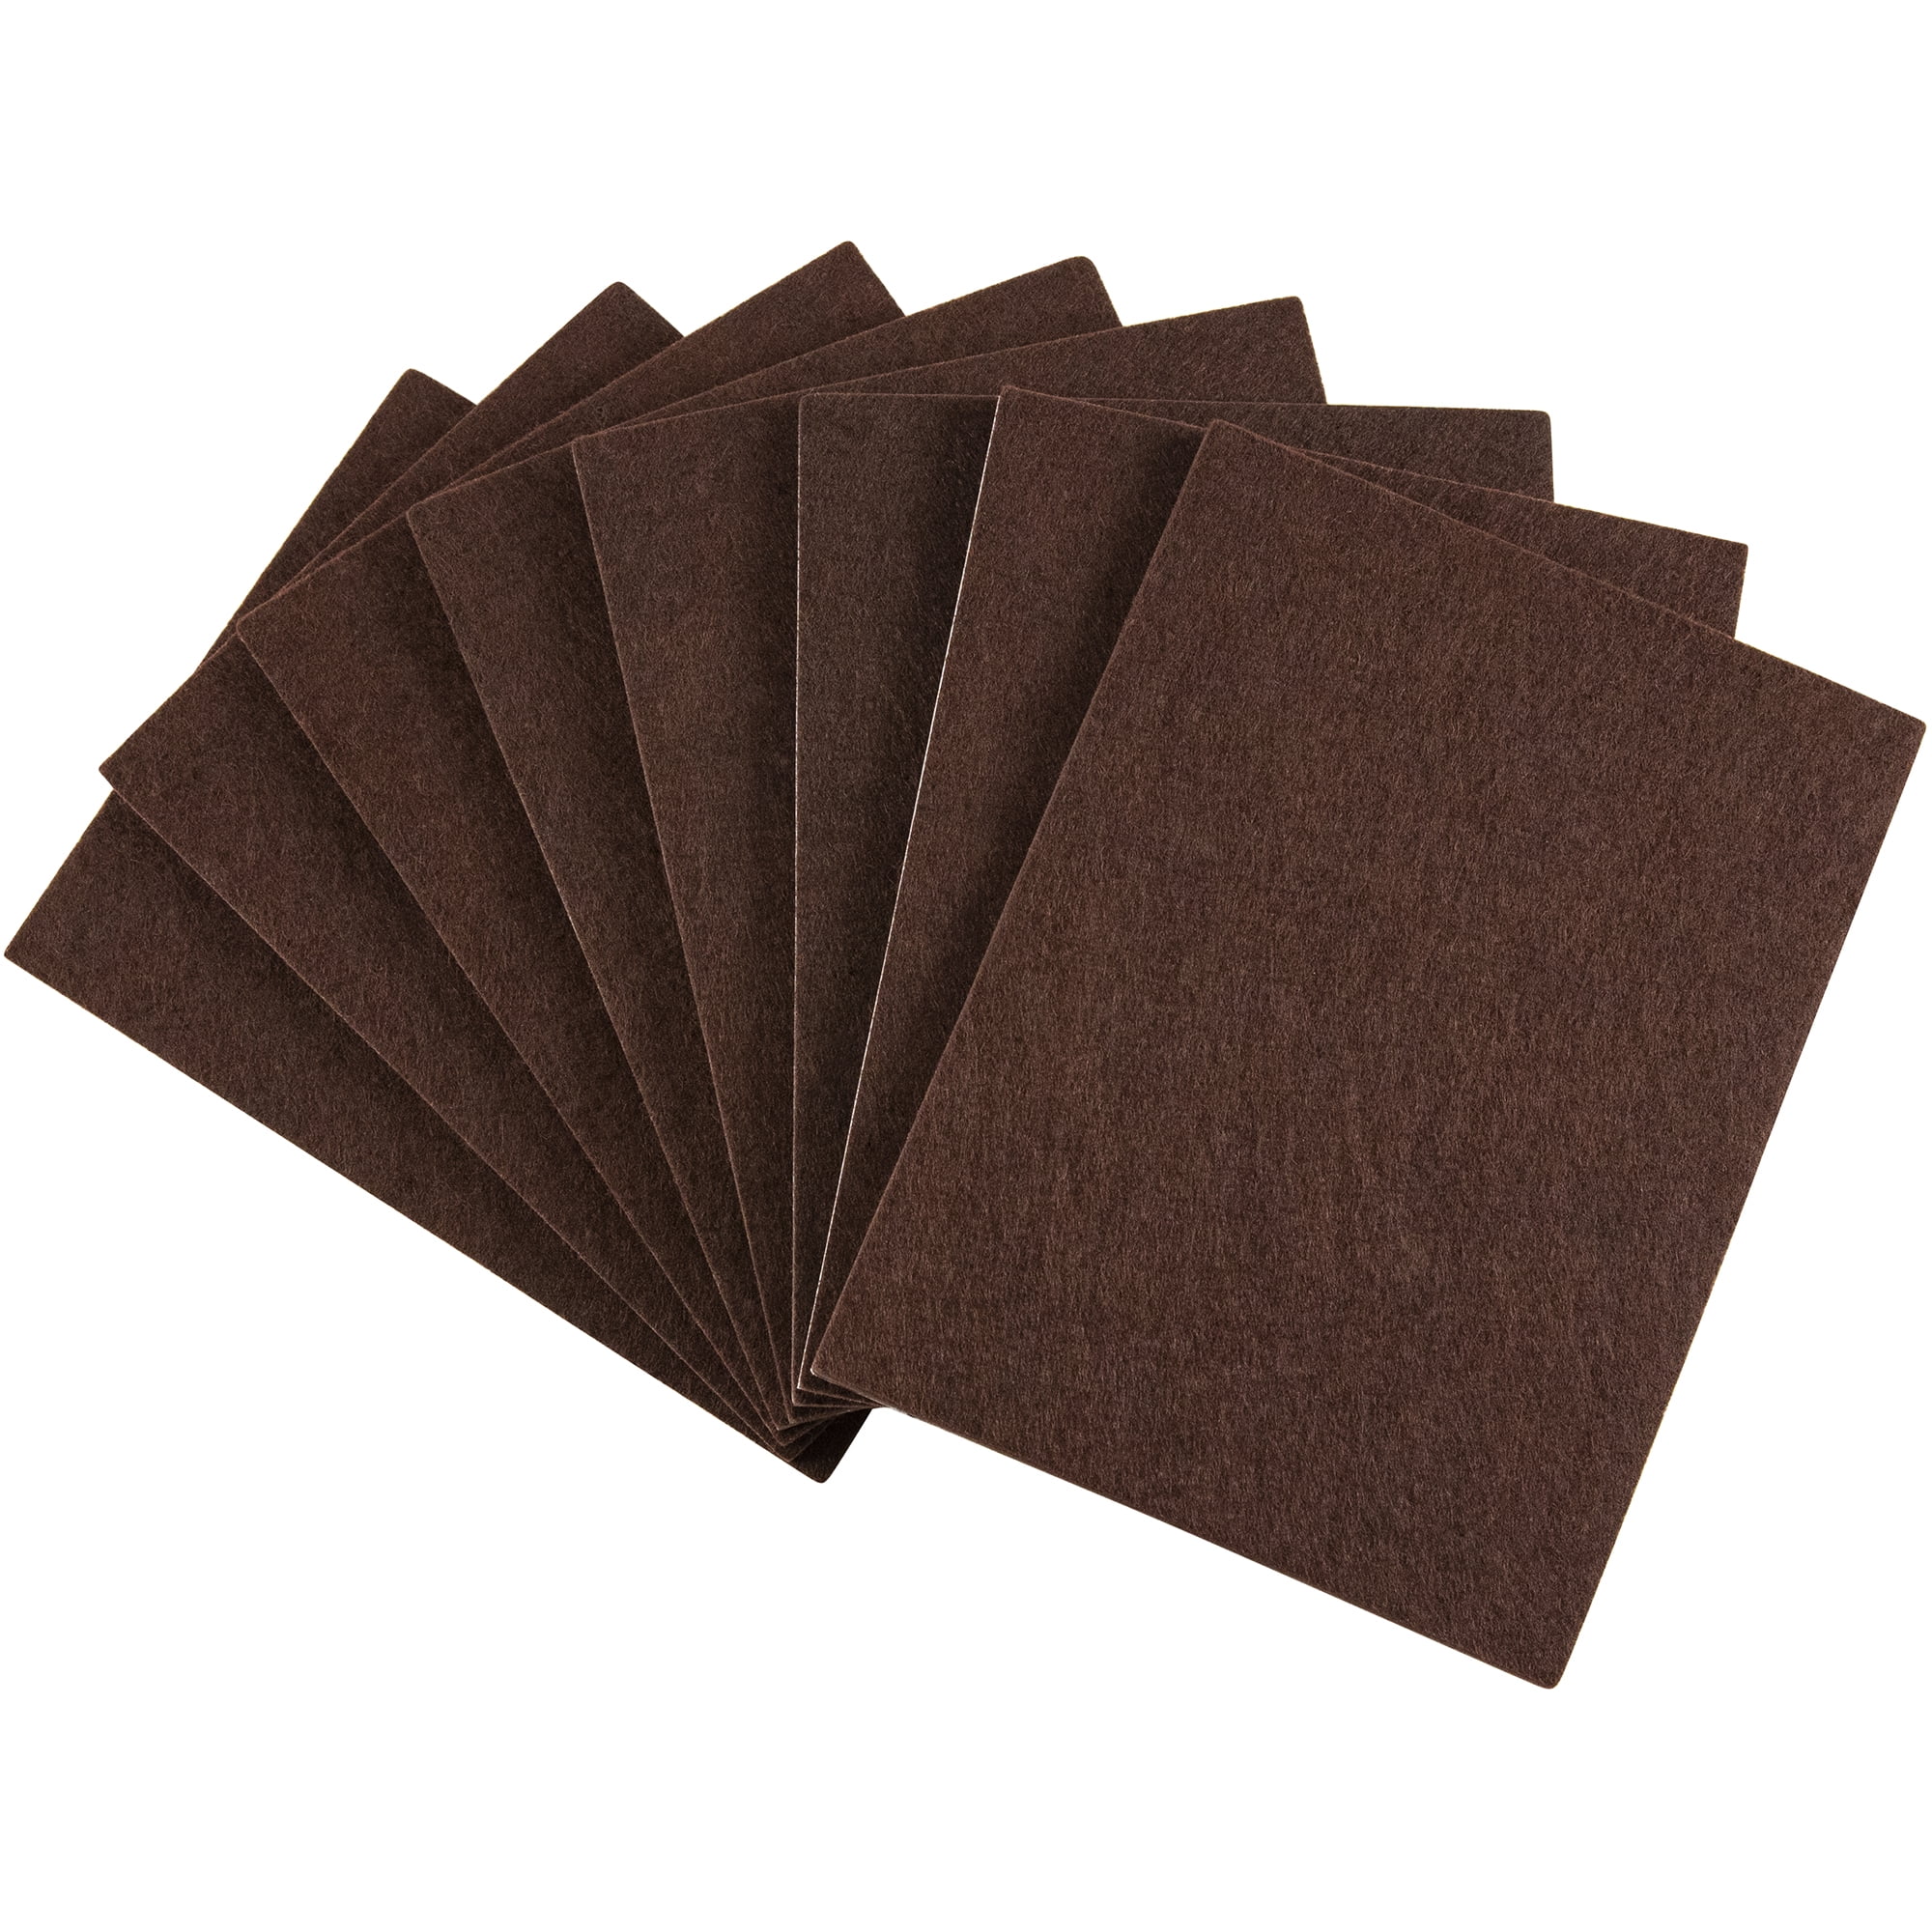 SoftTouch 3/8 Round Self-Stick Felt Pads, Brown (84 Pack) - Furniture Pads  